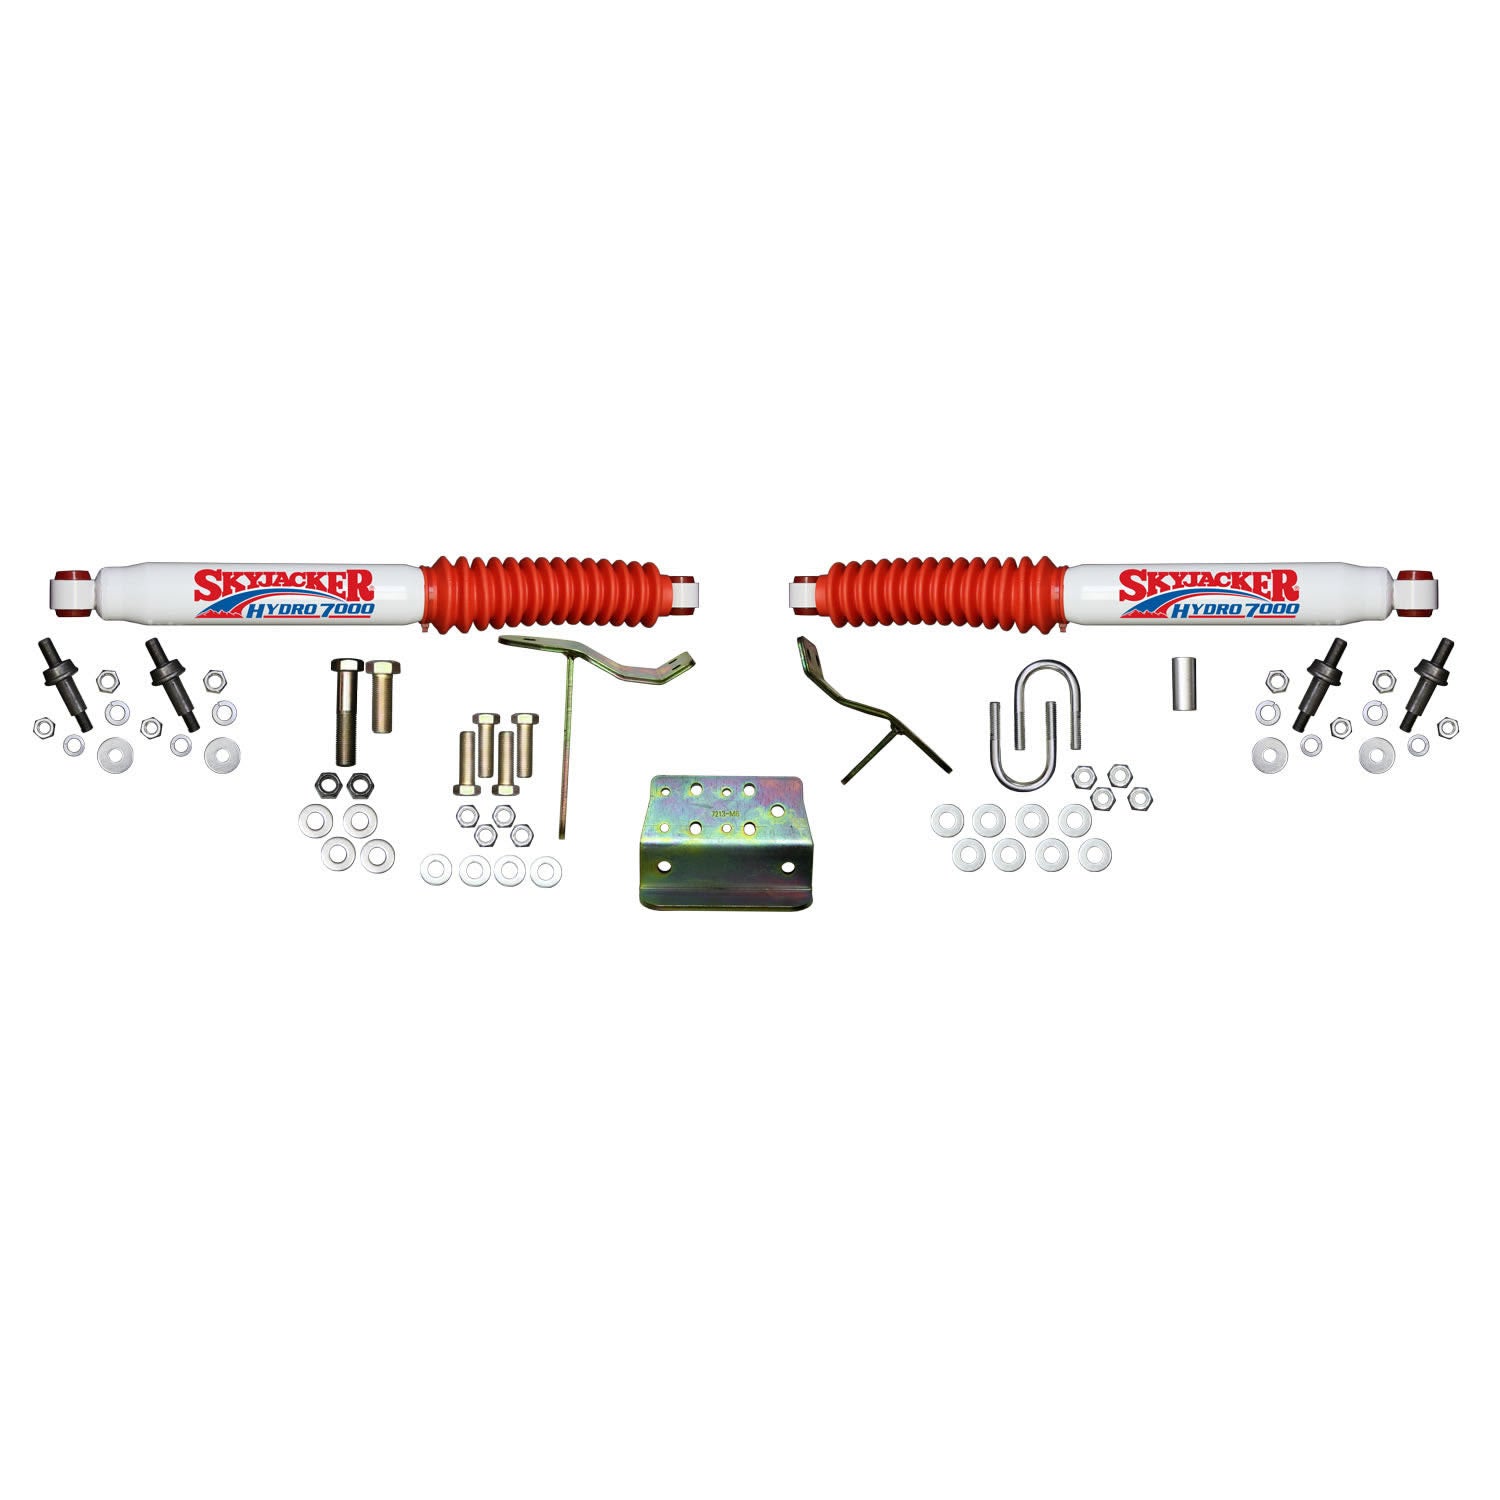 Steering Stabilizer Dual Kit Incl. Pr. Hydro 7000 Steering Stabilizers w/Red Boots Mounting Brackets Mounting Hardware Skyjacker